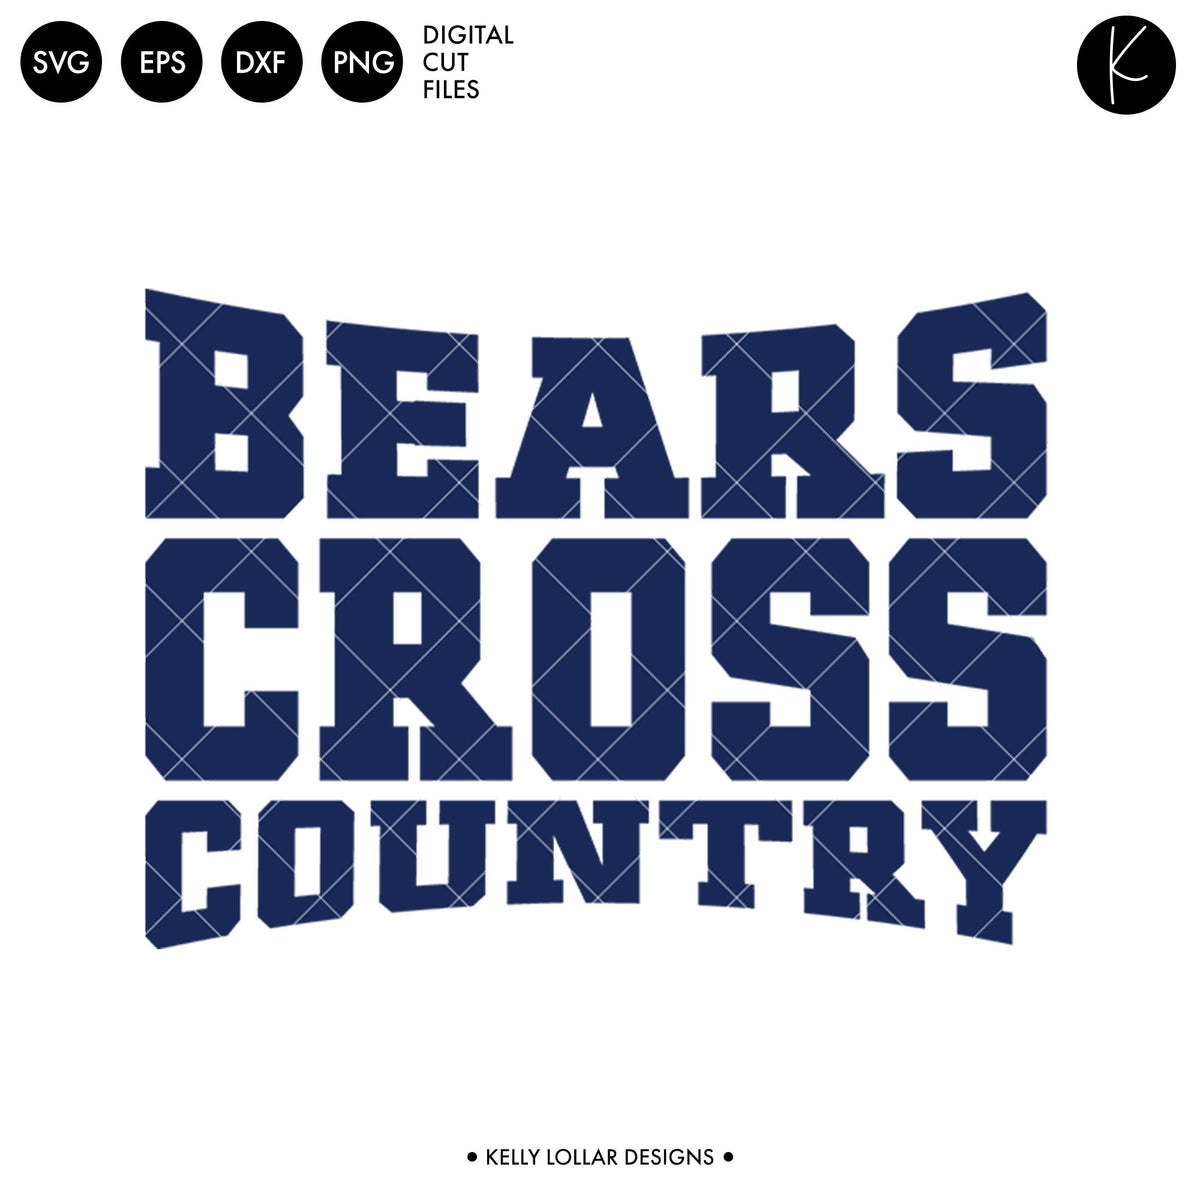 Bears Cross Country Bundle | SVG DXF EPS PNG Cut Files